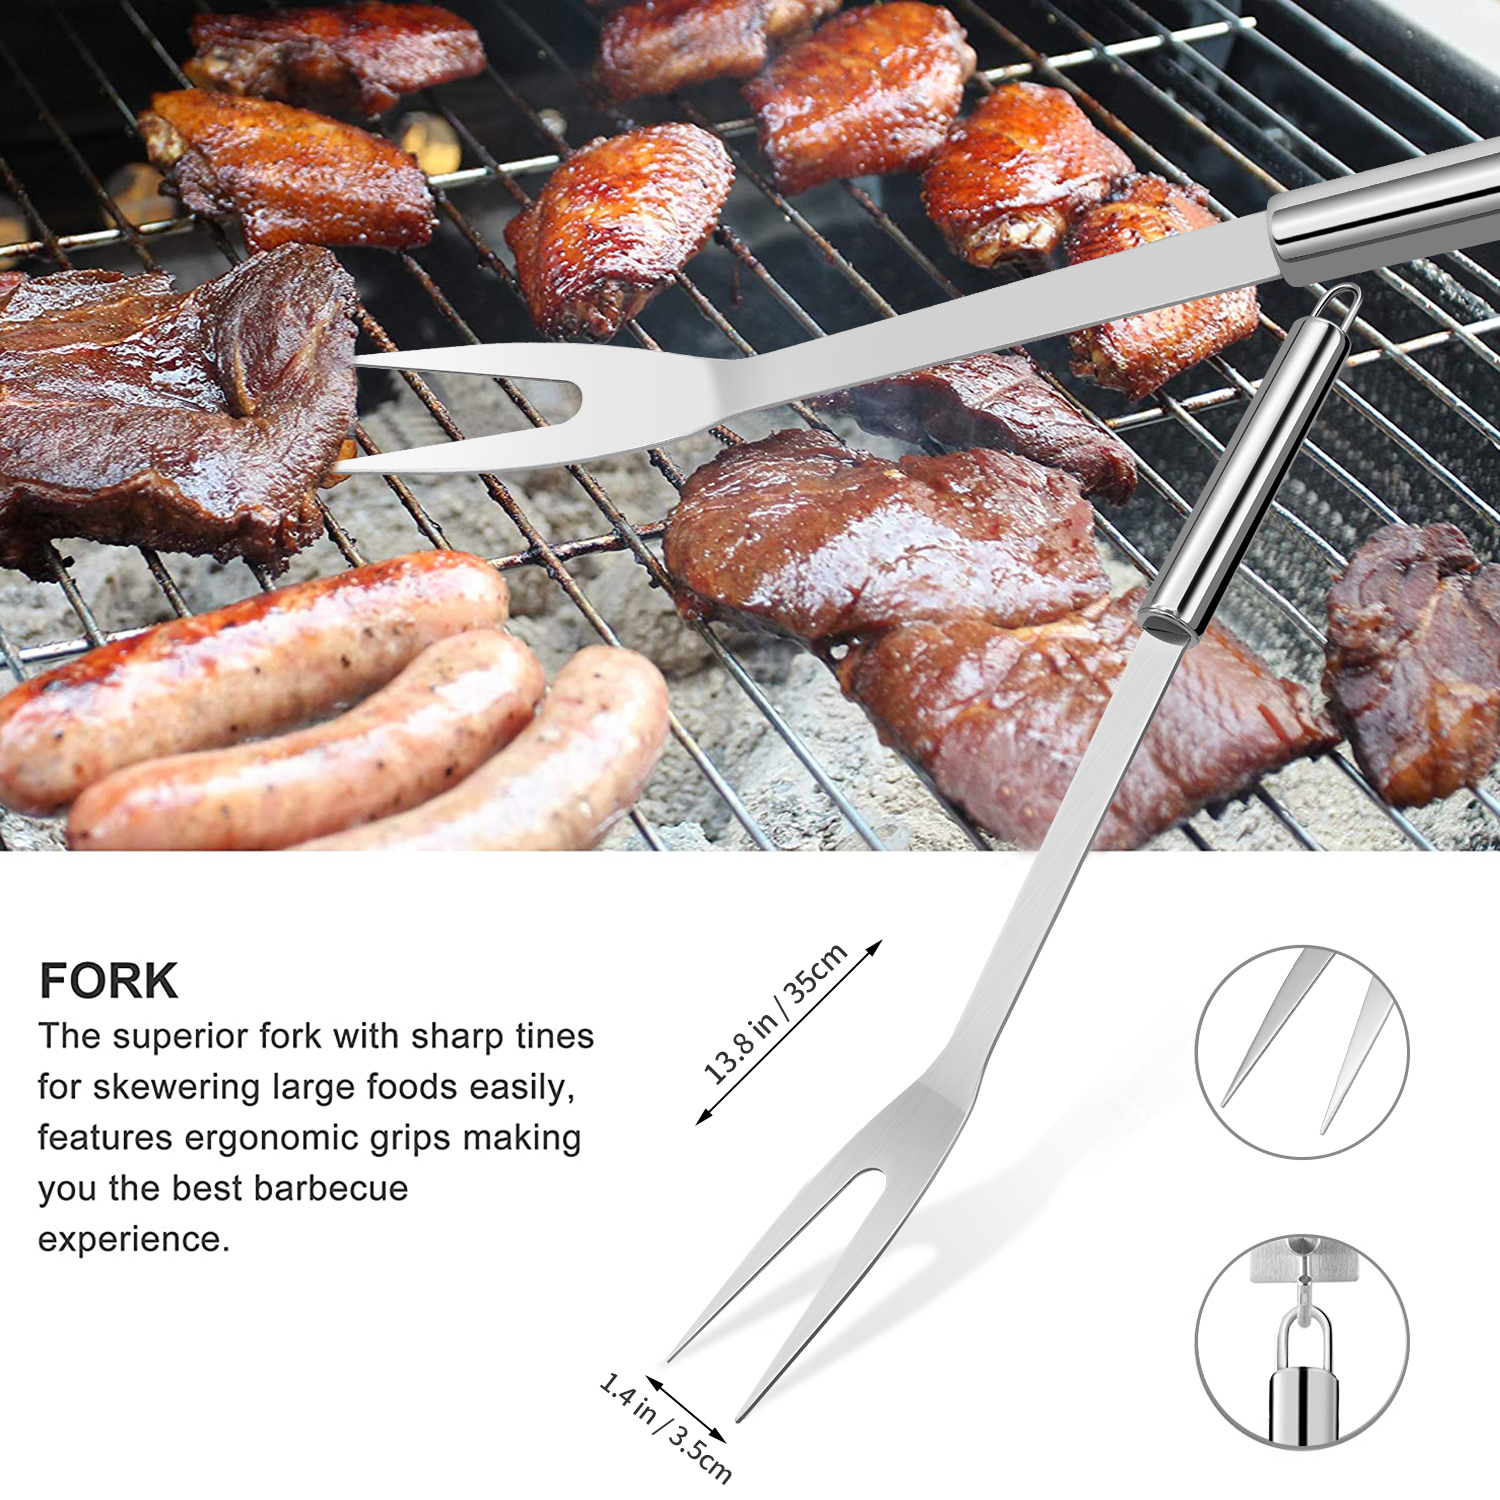 JOW BBQ Grill Accessories Set with Case, 26pc Stainless Steel Heavy Duty Barbecue Grilling Tool Utensils Kit with Tong, Grill Cleaning Brush, Spatula, Fork, Basting Brush - image 4 of 12